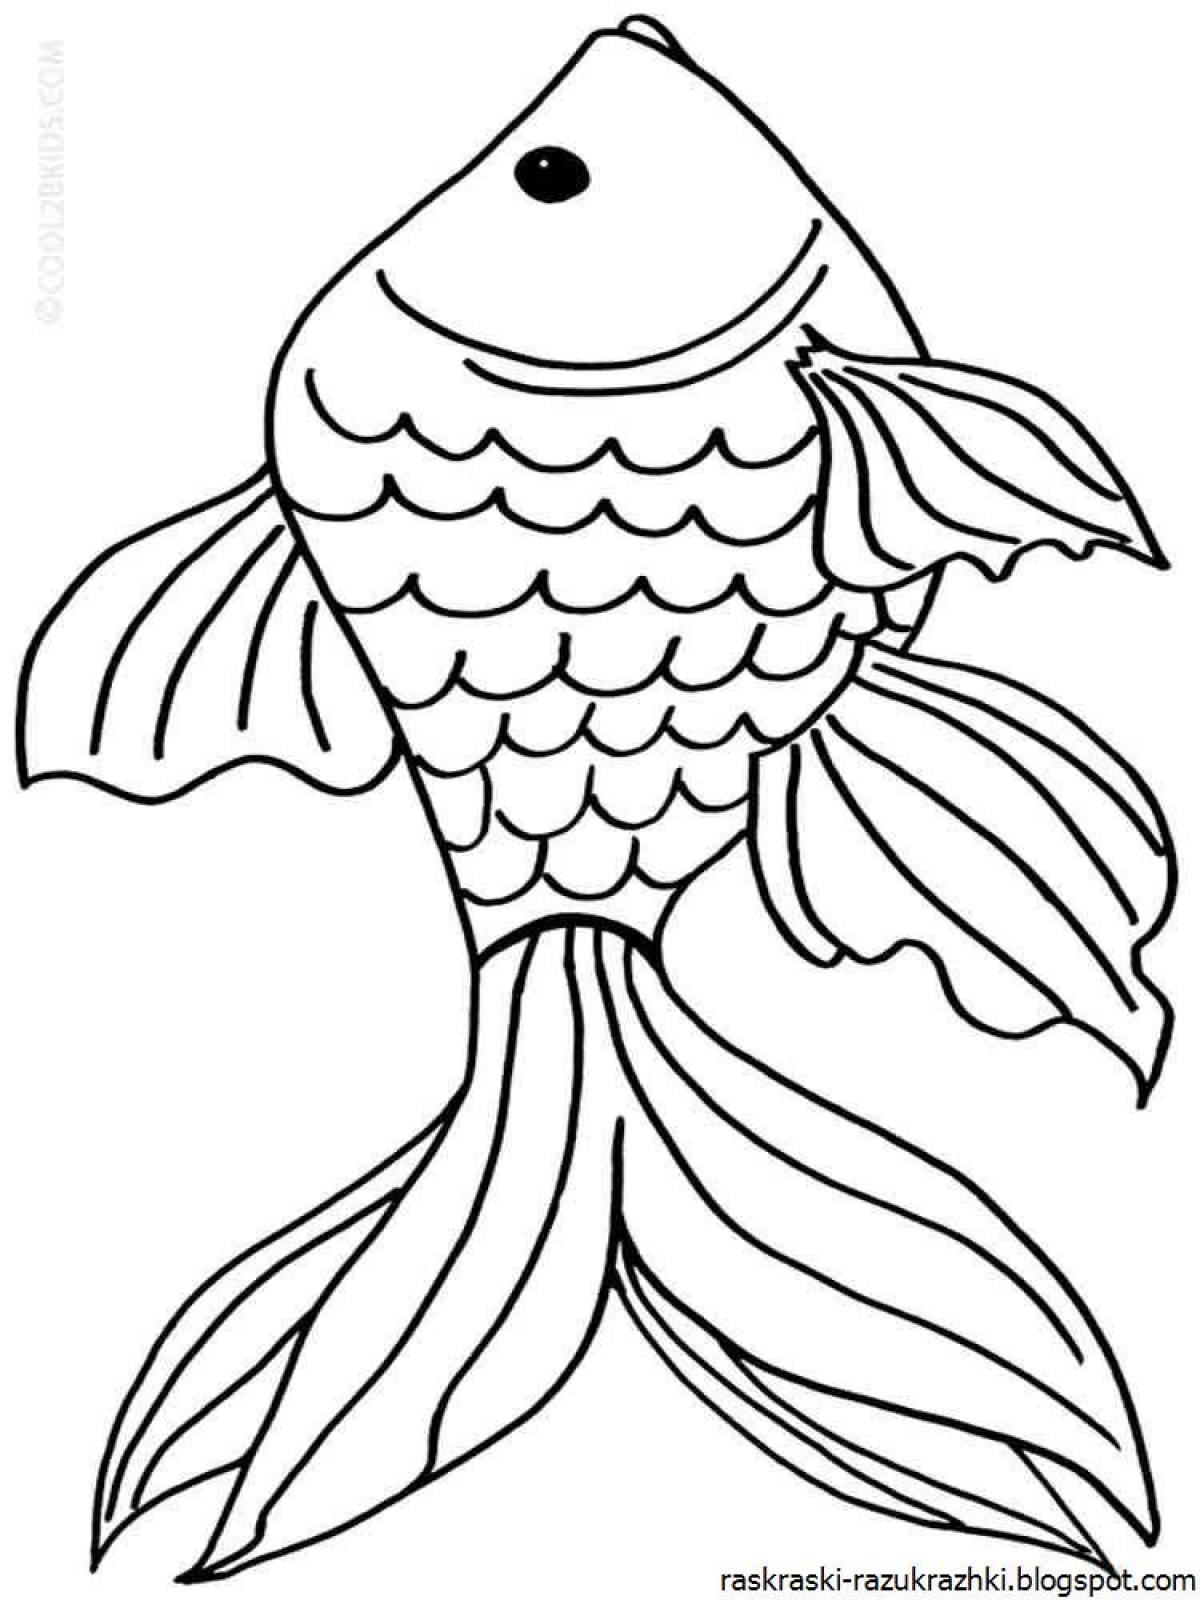 Sweet goldfish coloring for kids